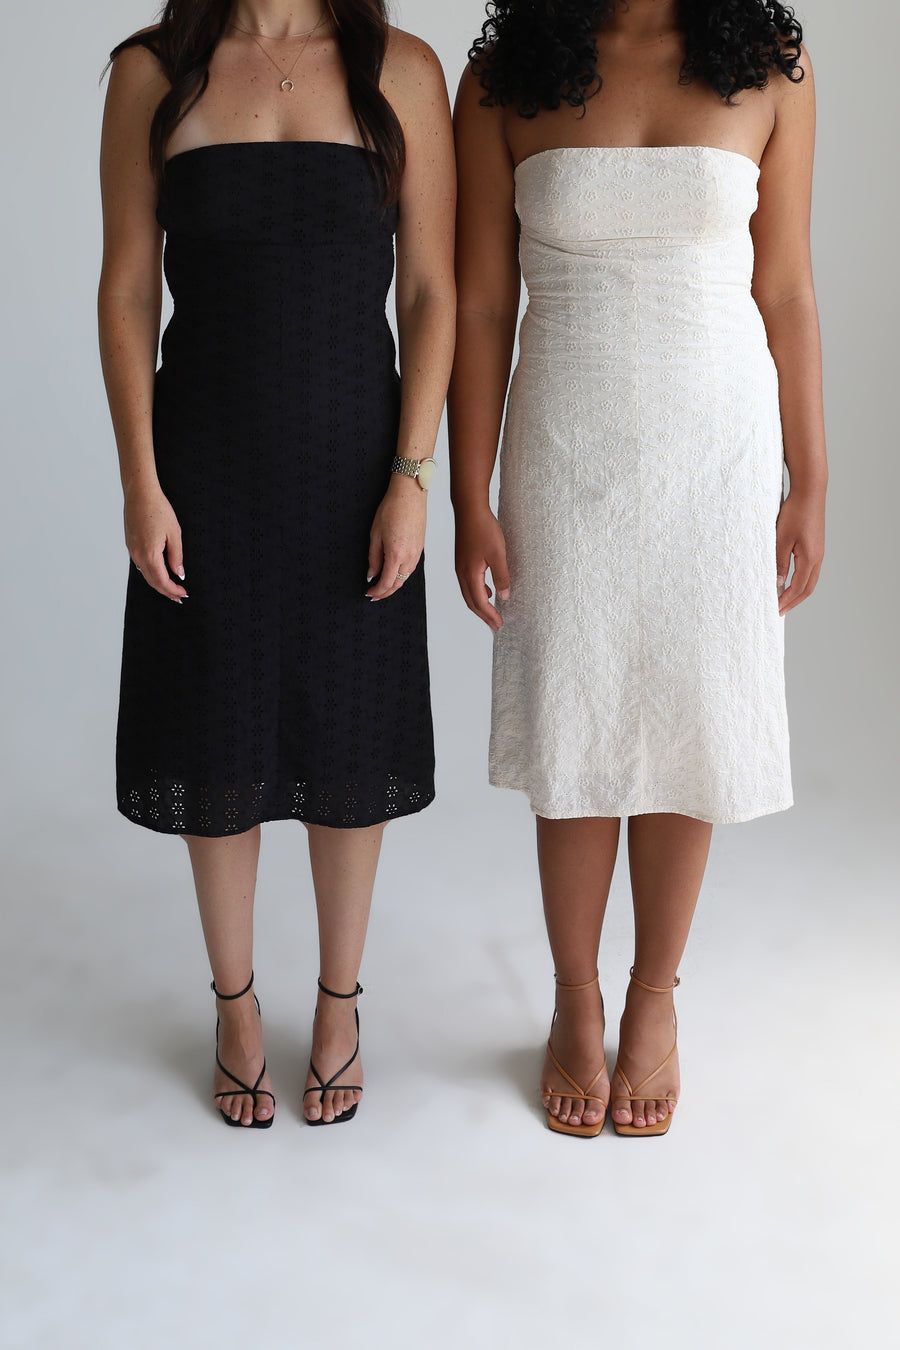 Two models wearing black and white versions of a dress facing a camera.